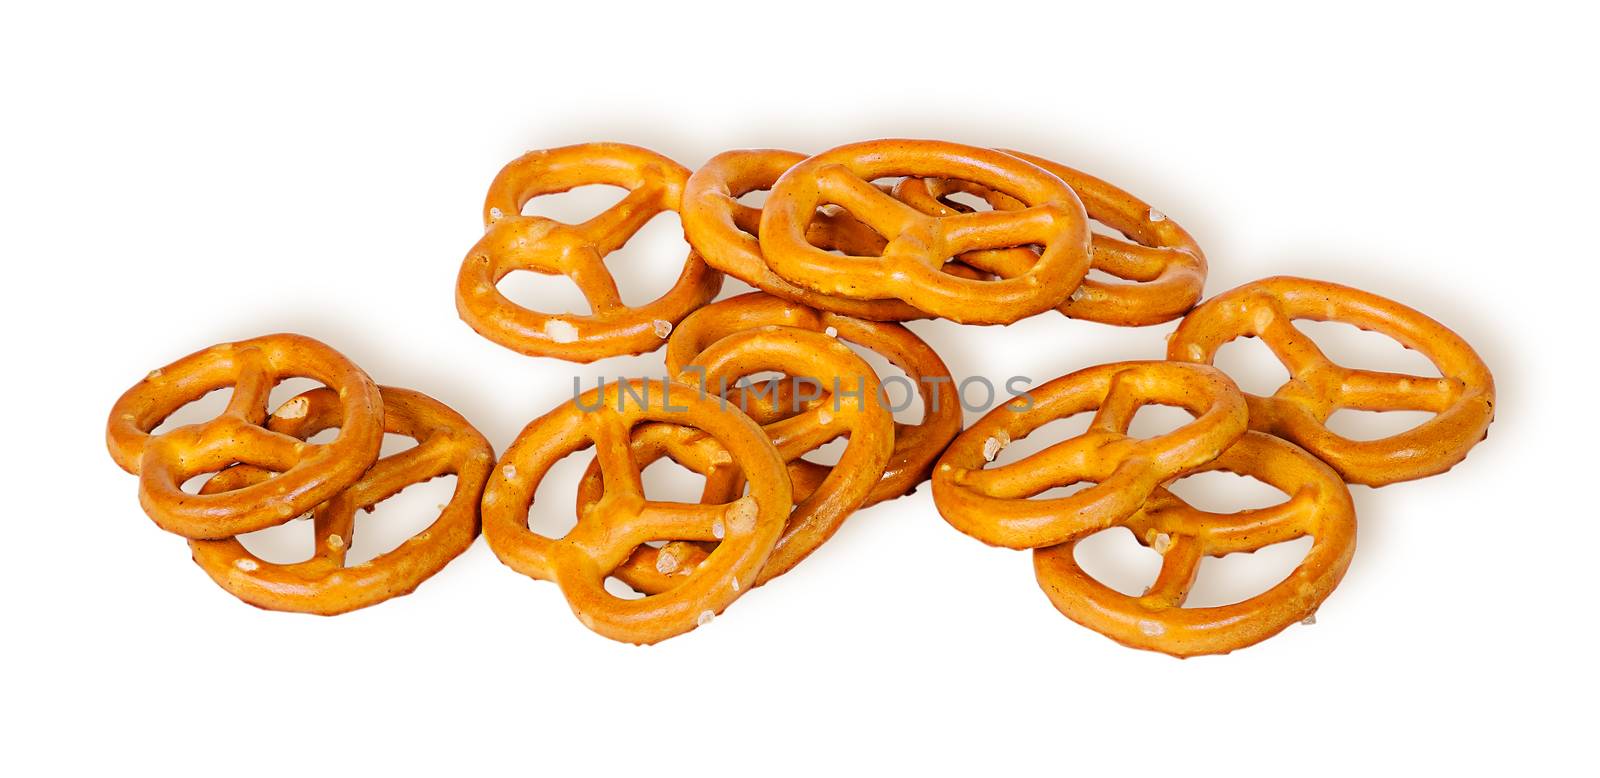 Pile crunchy pretzels with salt isolated on white background